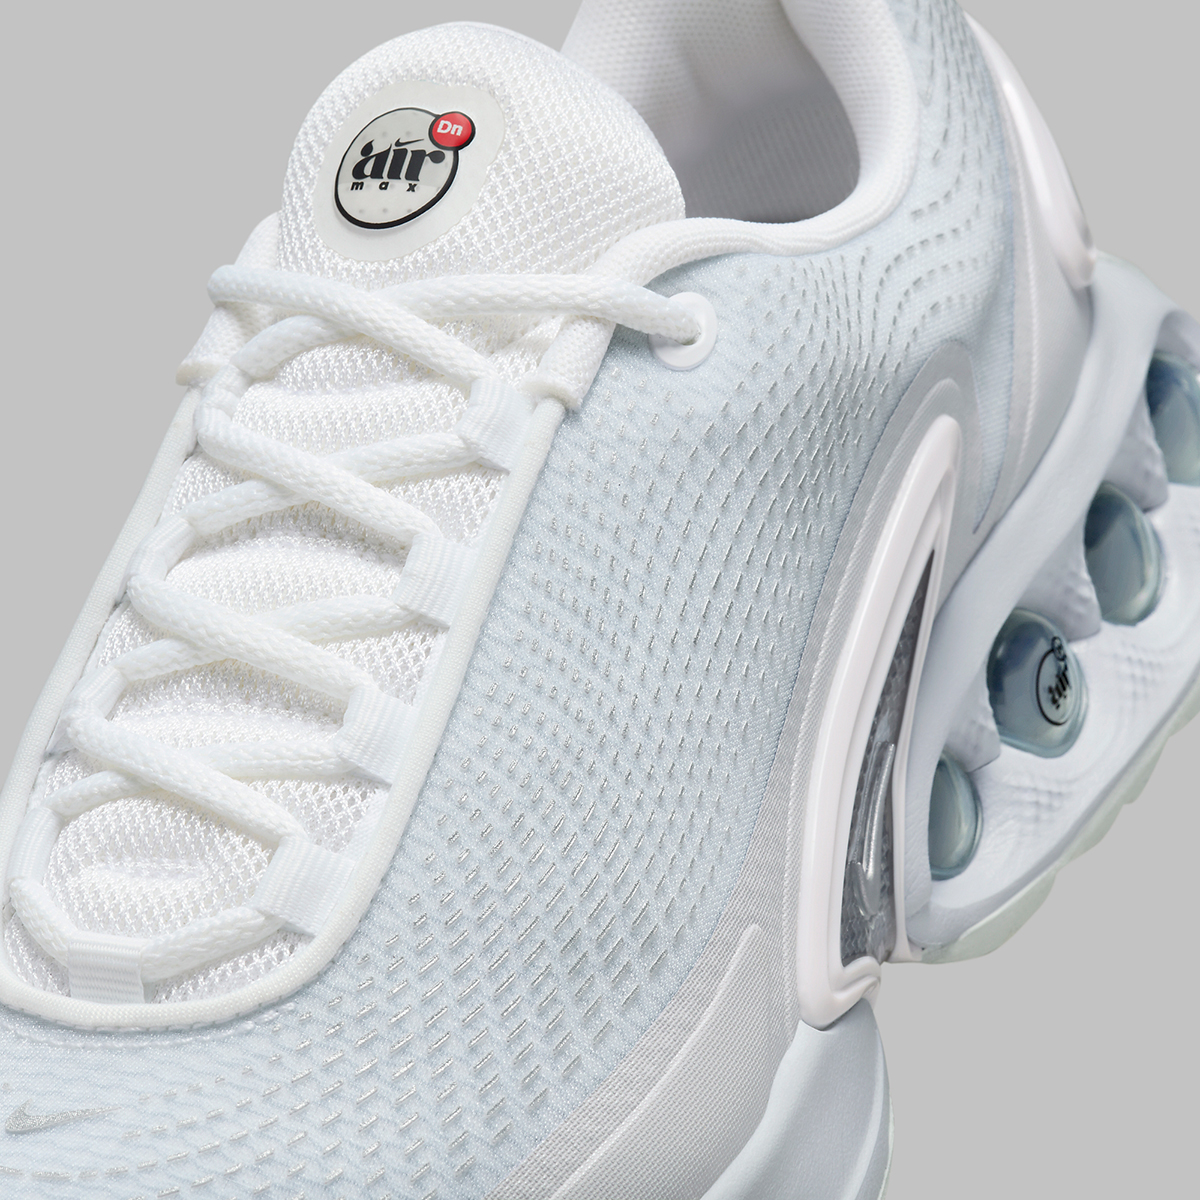 Official Retailer Images Of The Nike Air Max Dn "White/Silver